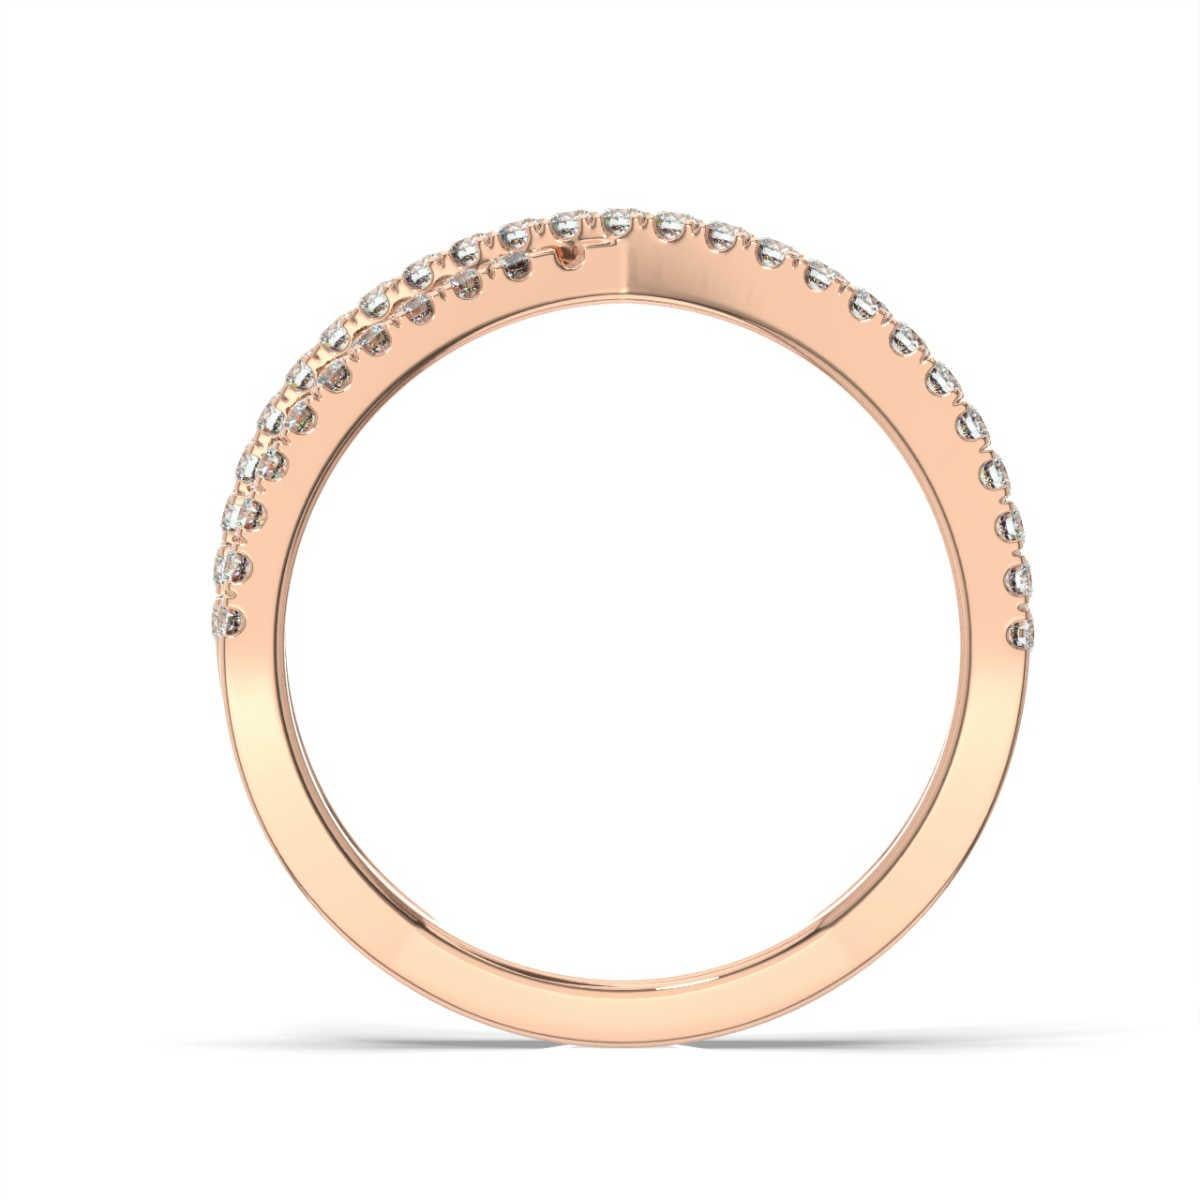 Two petite bands of micro prong set diamonds to wrap interweave each other in this contemporary ring.

Product details: 

Center Gemstone Color: WHITE
Side Gemstone Type: NATURAL DIAMOND
Side Gemstone Shape: ROUND
Metal: 18K Rose Gold
Metal Weight: